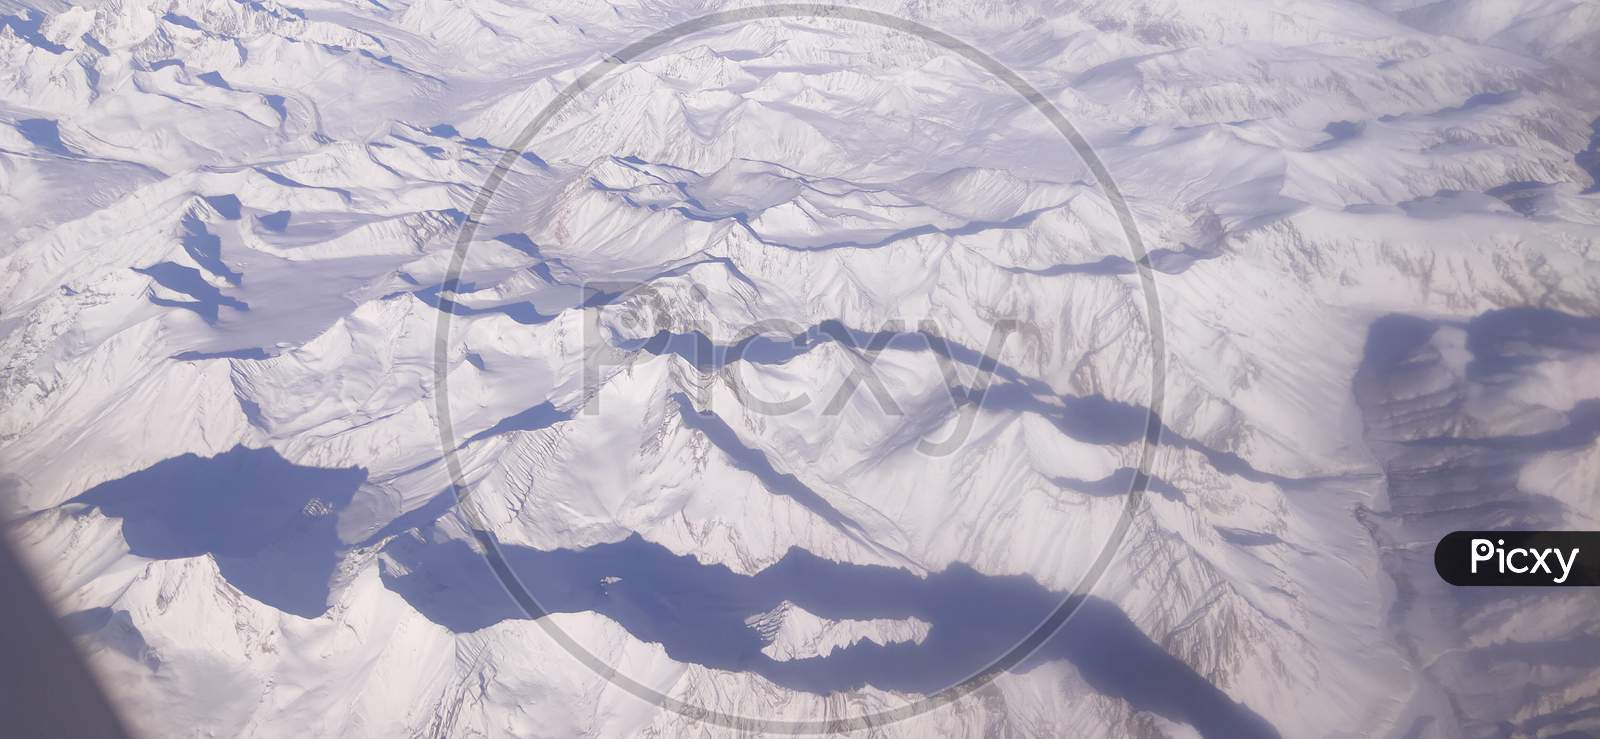 A view of the Ladakh Range of mountains as seen from a flight in winter, while landing at Leh, India